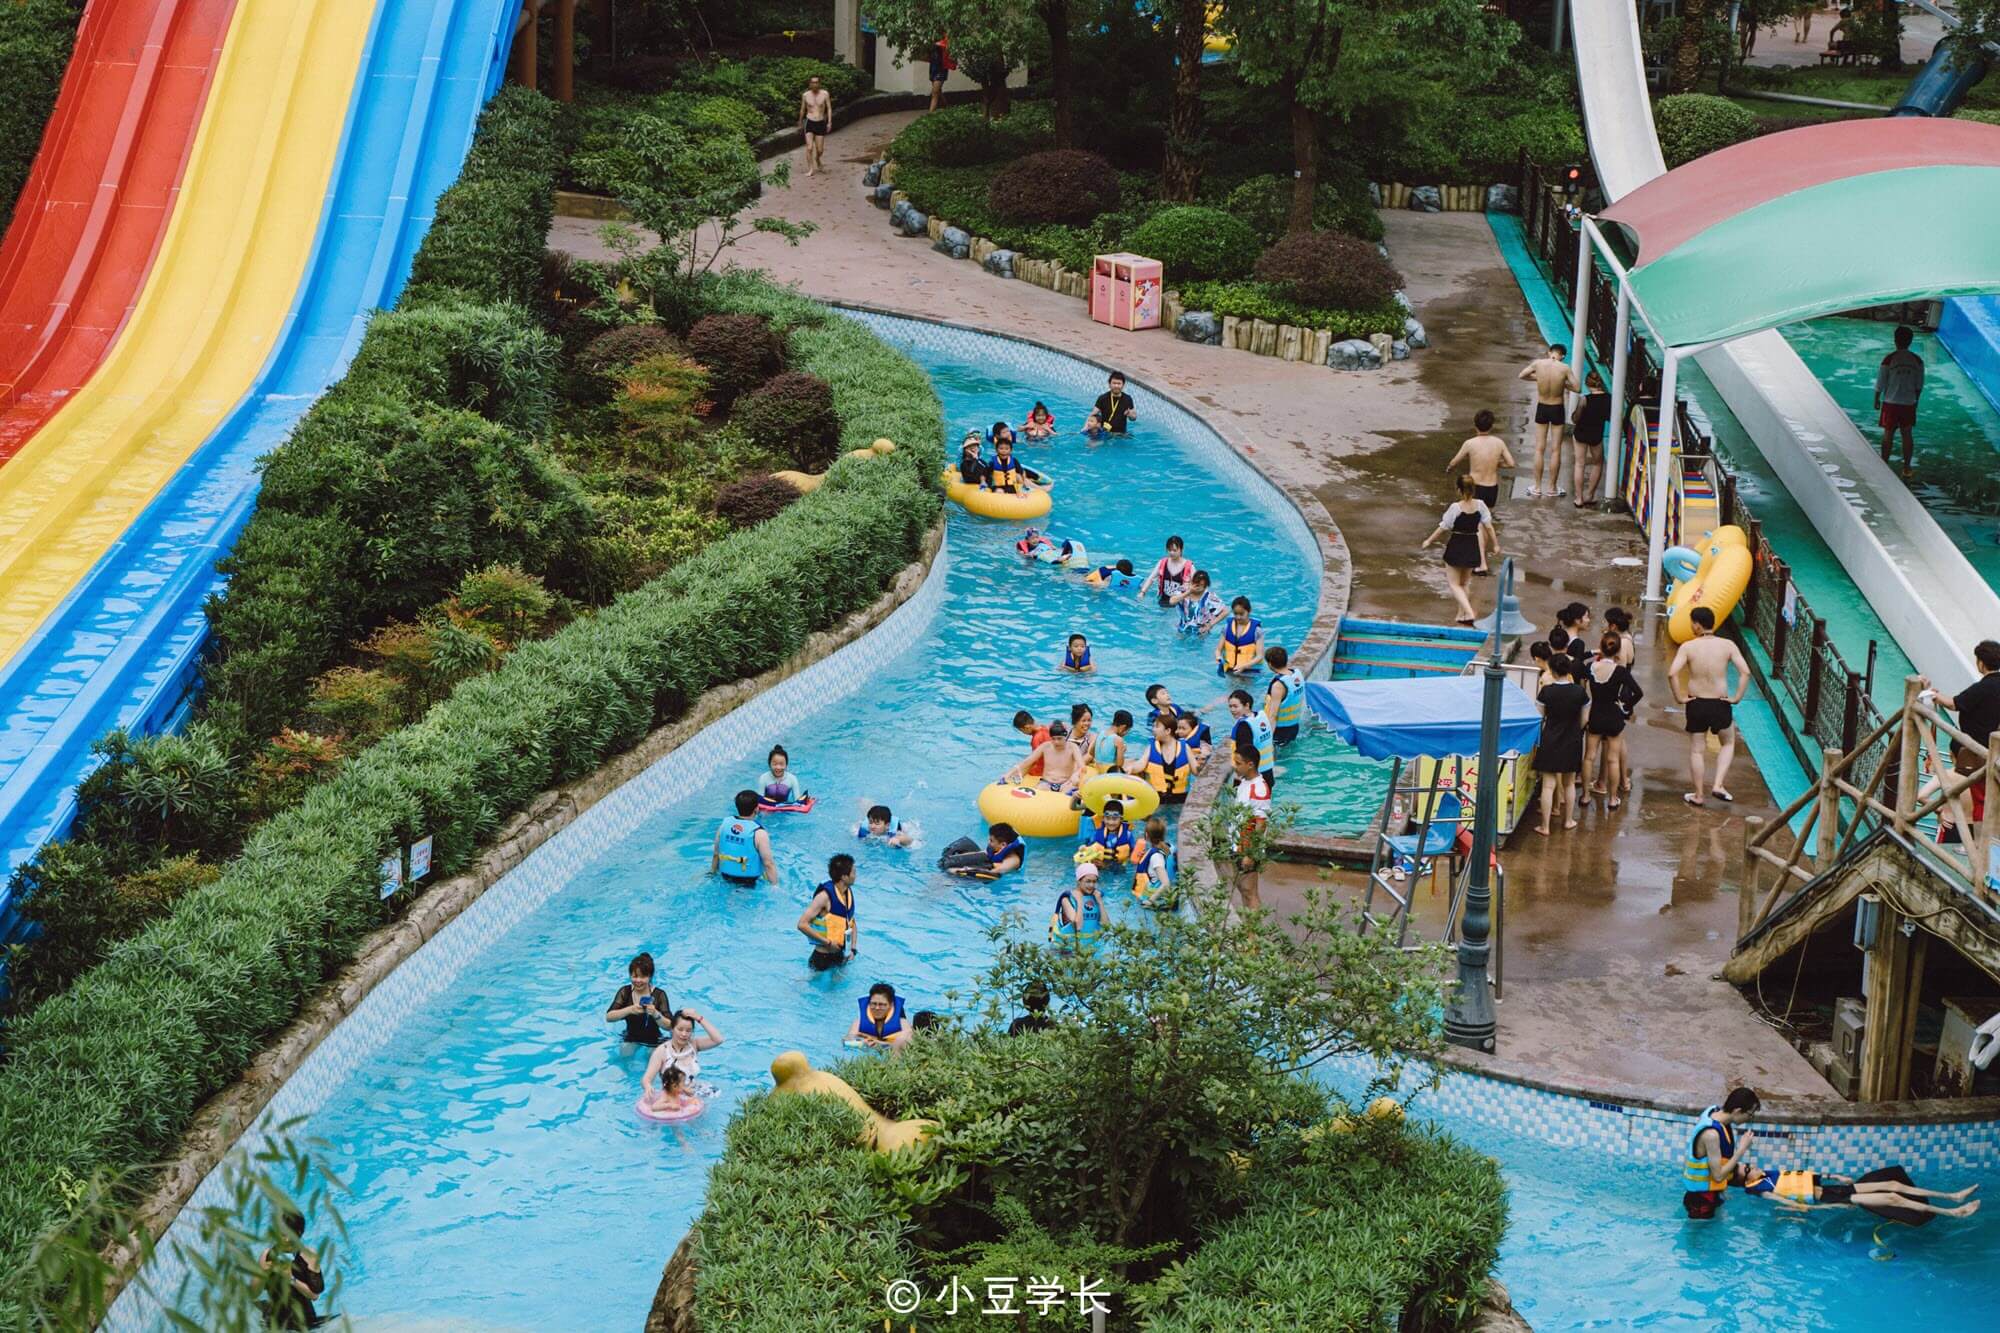 Waterparks are very popular in China during the summer heat